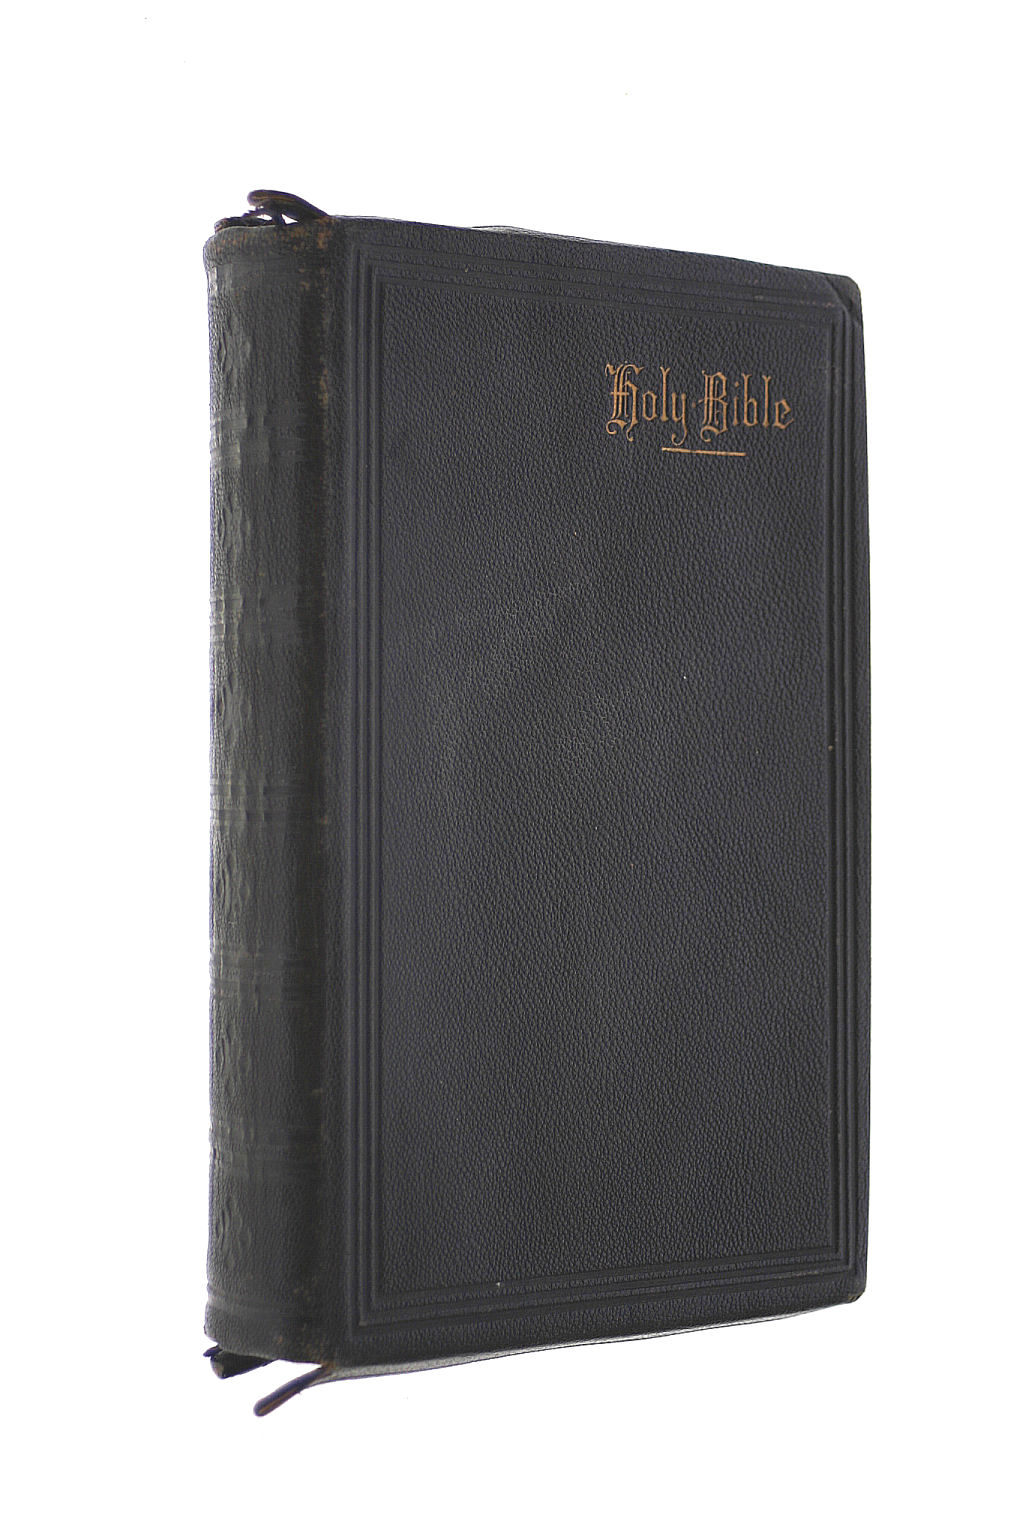 ANON - The Holy Bible Containing the Old and New Testaments